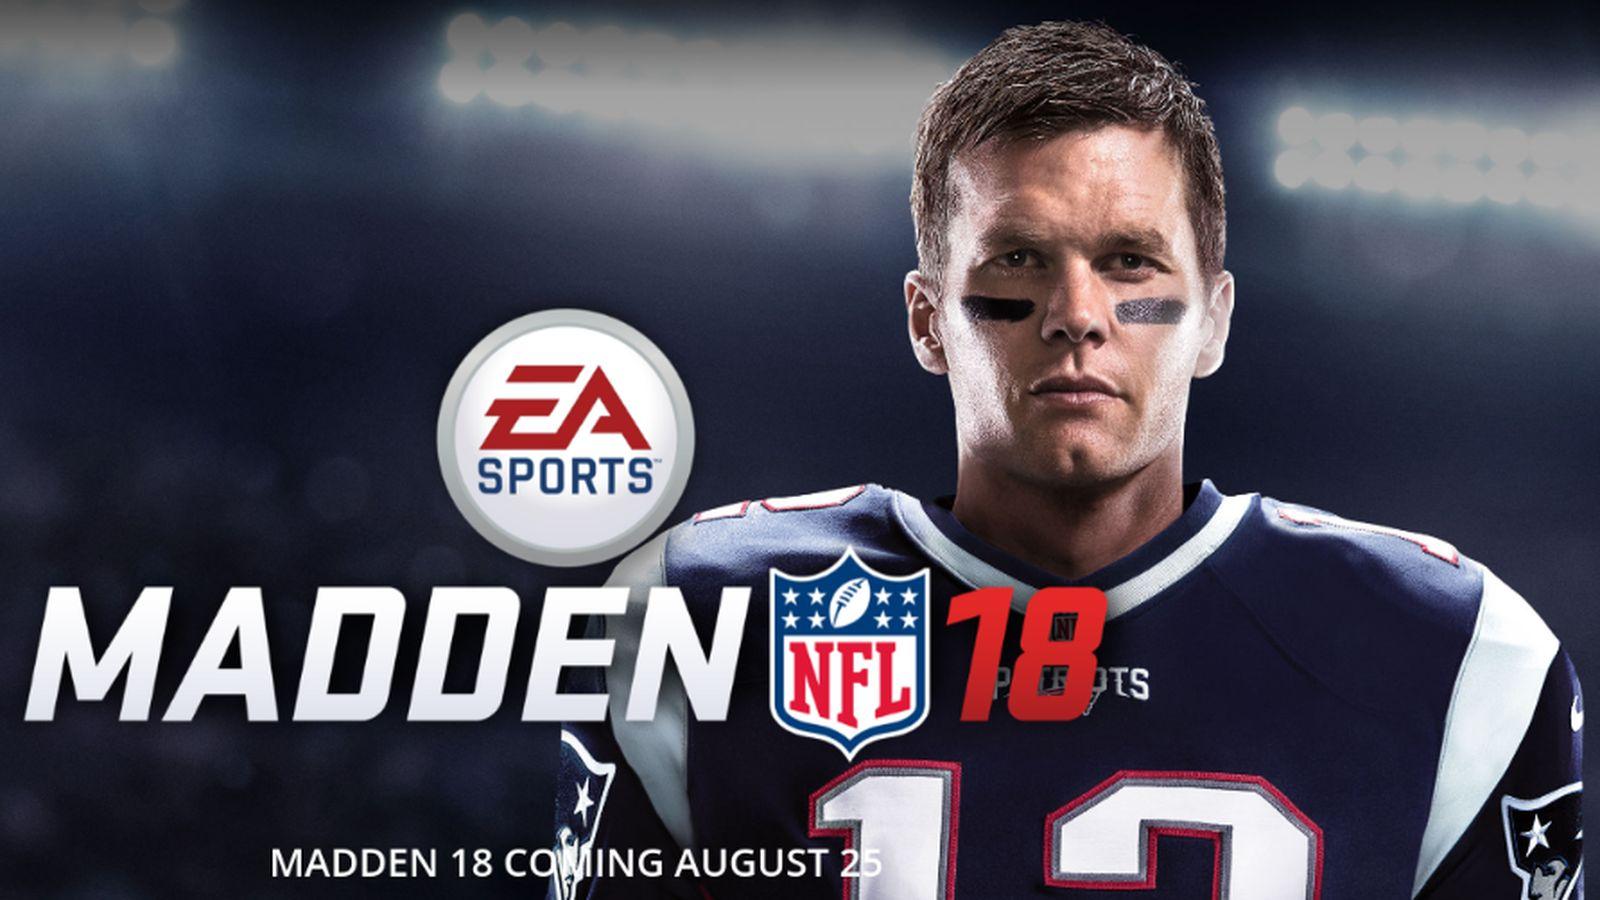 NFL Madden '18 Midnight Launch And Community Series Kick Off